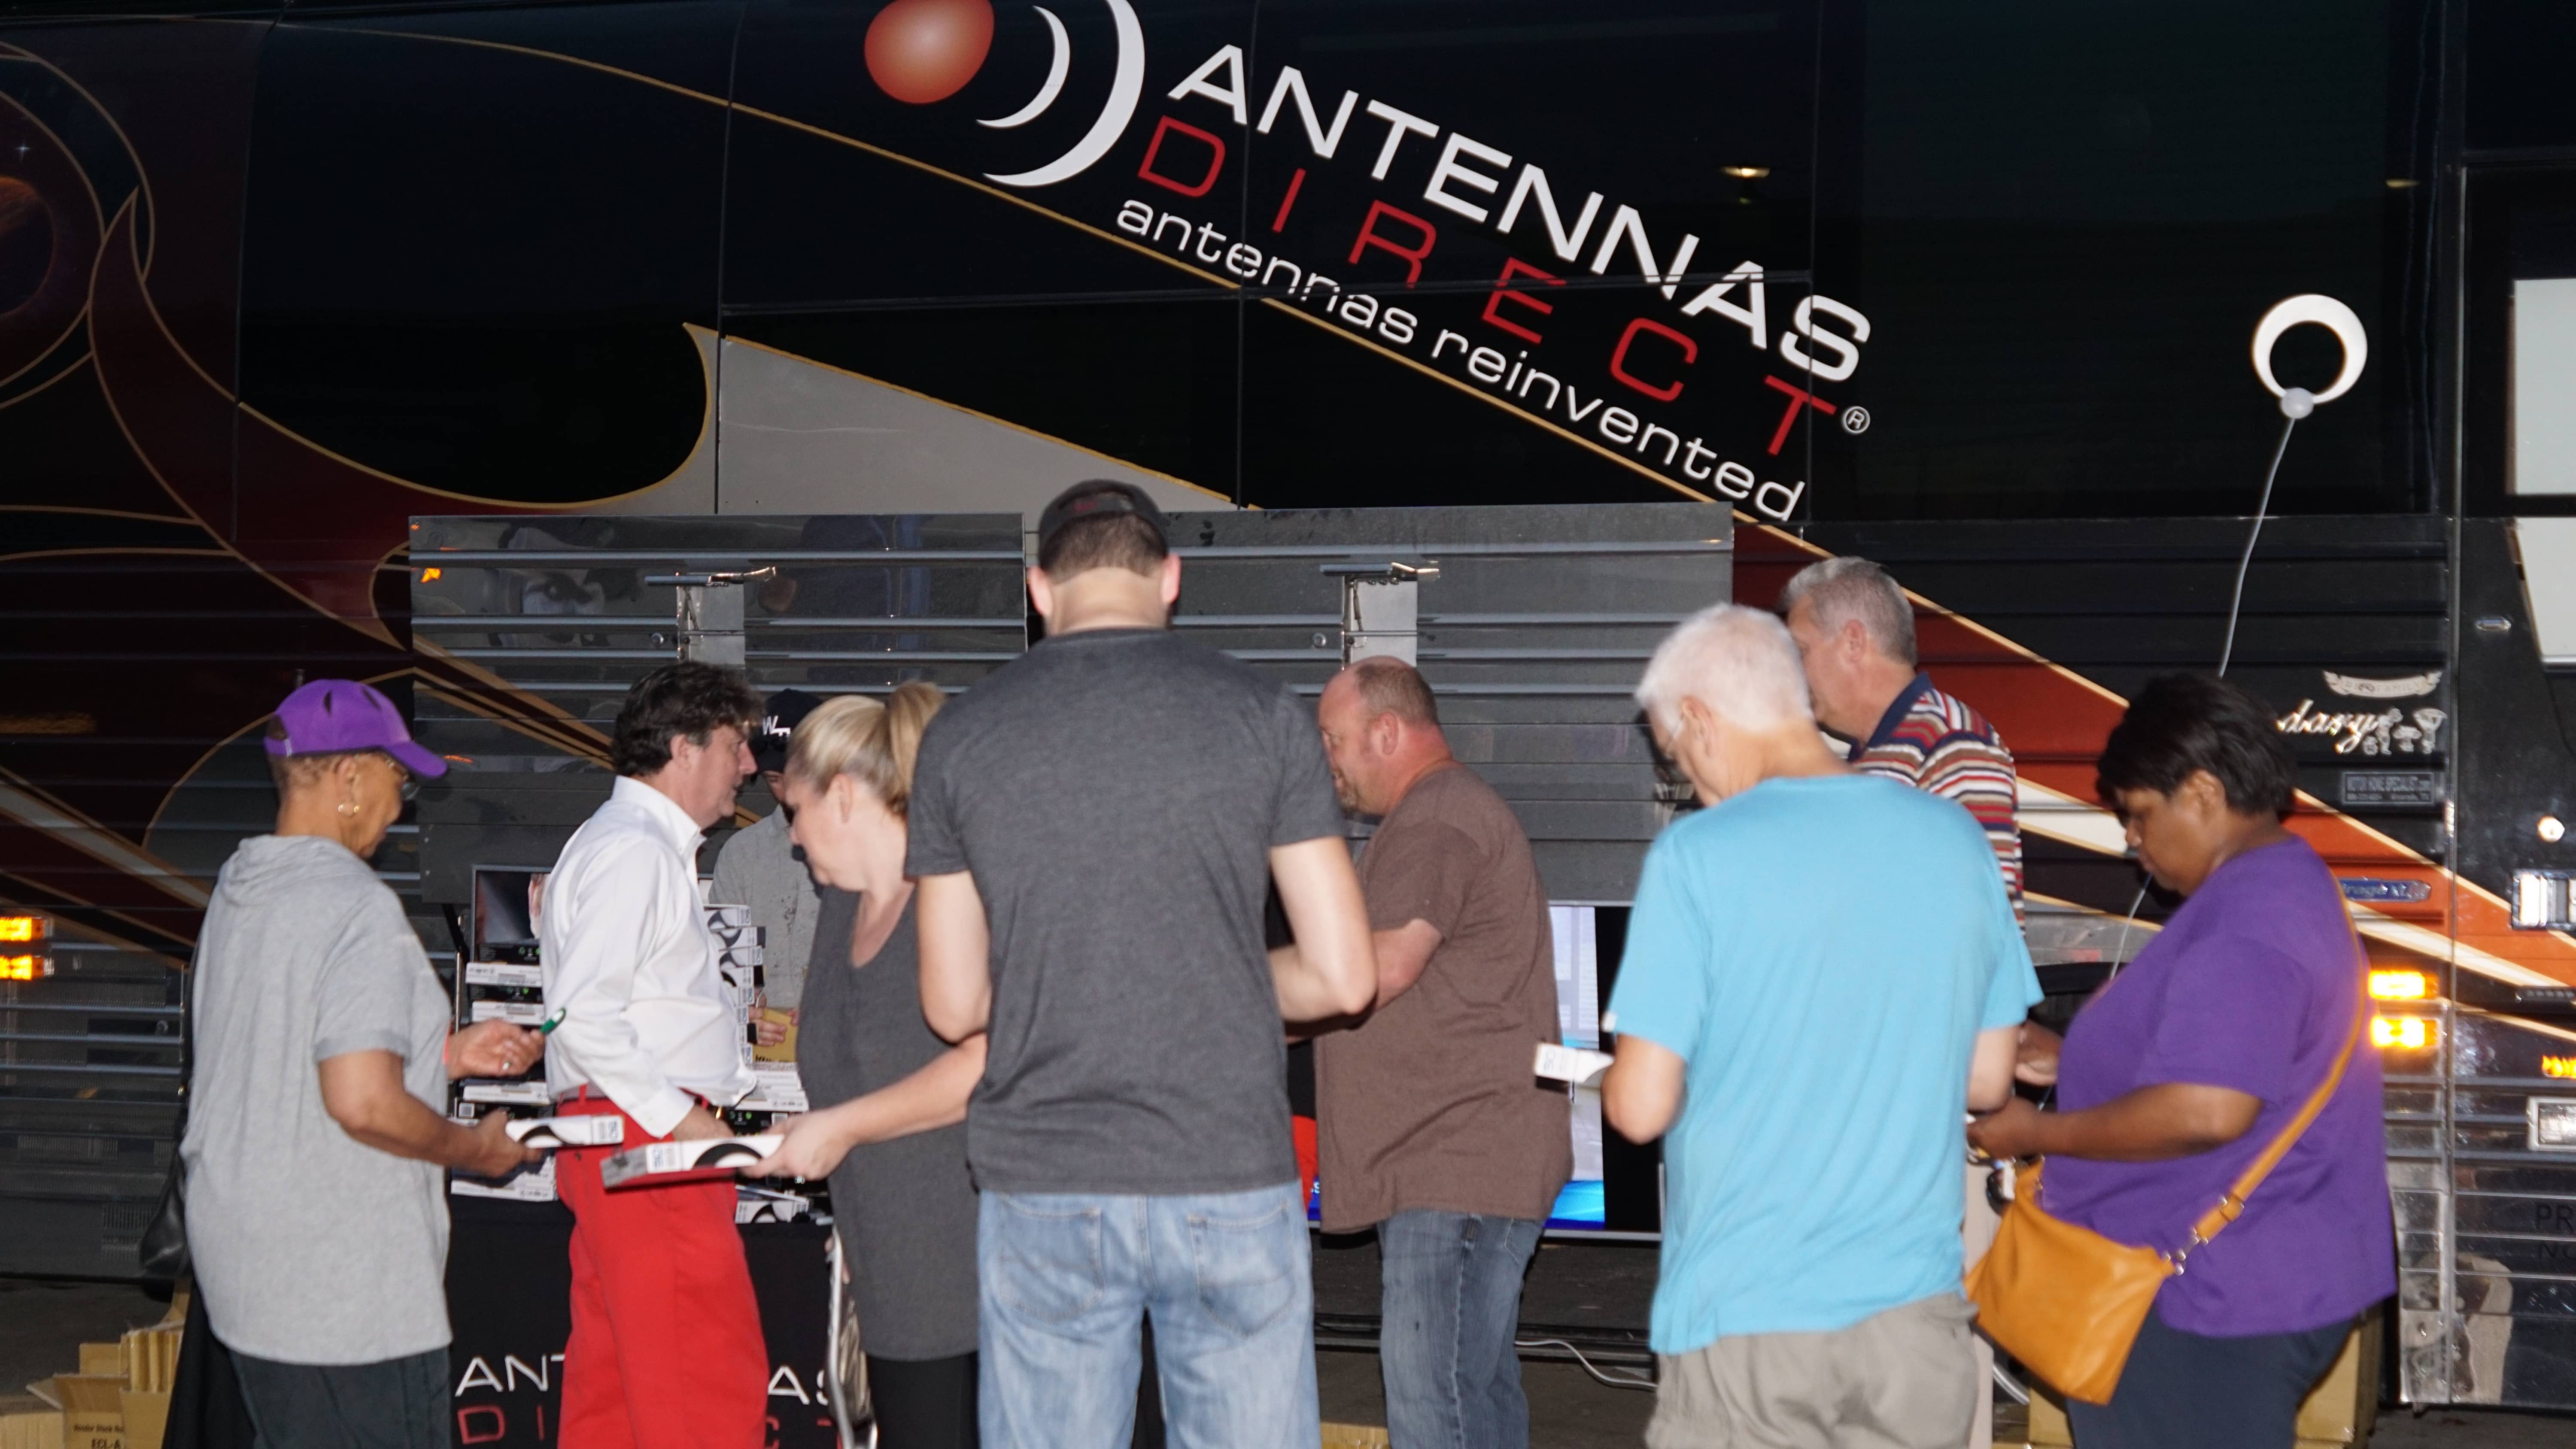 Results image of Little Rock group in front of Antennas Direct bus for antenna giveaway